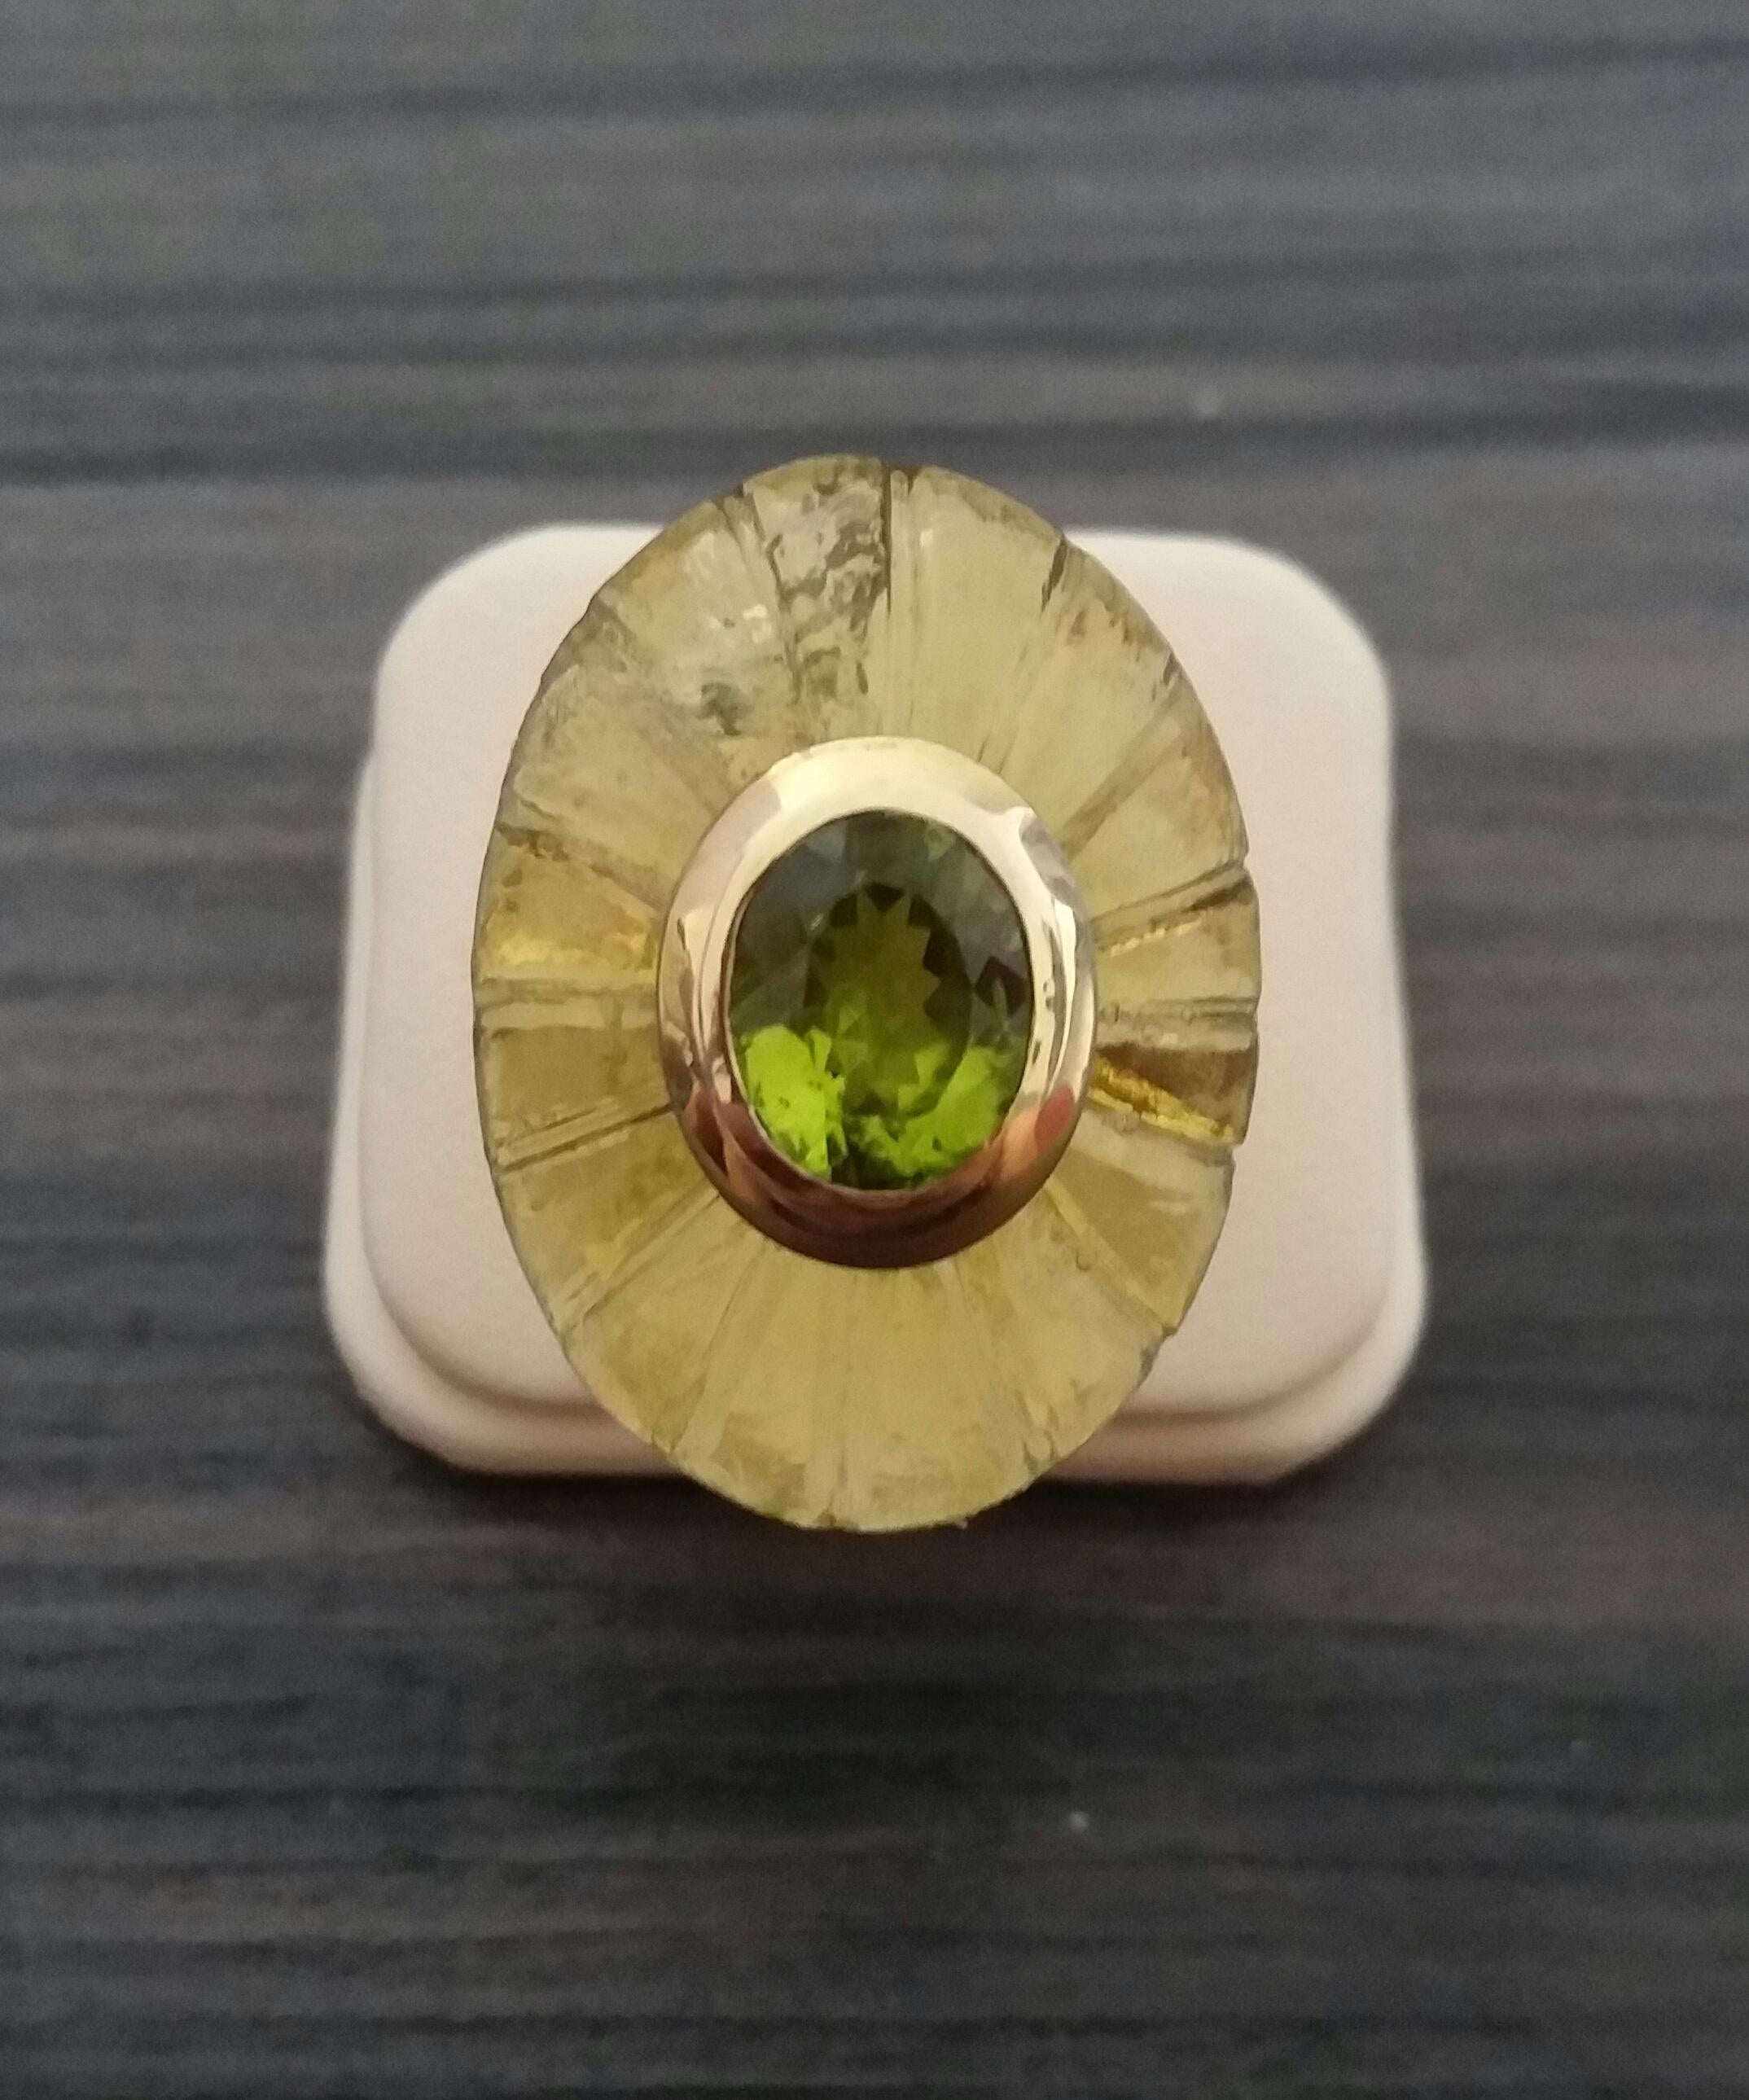 Unique ring with a Big Natural Engraved Lemon Quartz Cab ,measuring 30 mm. x 23 mm x 10mm. and weighing 53 Carats with a nice Oval Faceted Peridot measuring 8 mm x 10 mm set in 14 kt yellow gold...Ring shank is also in 14 kt  solid yellow gold now